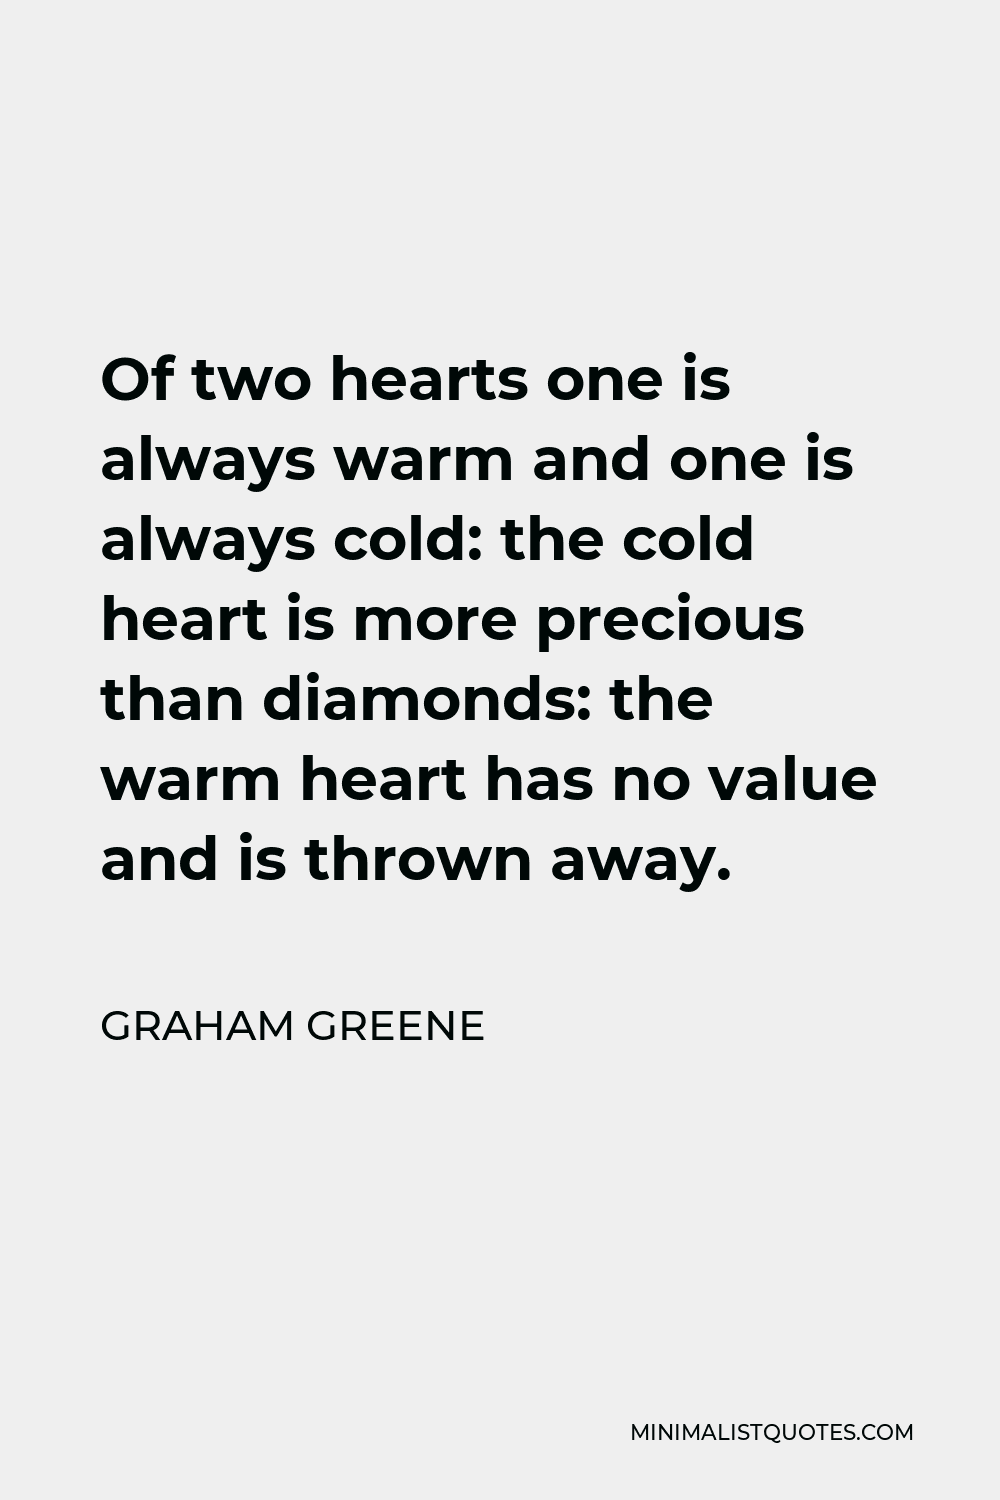 Graham Greene Quote - Of two hearts one is always warm and one is always cold: the cold heart is more precious than diamonds: the warm heart has no value and is thrown away.